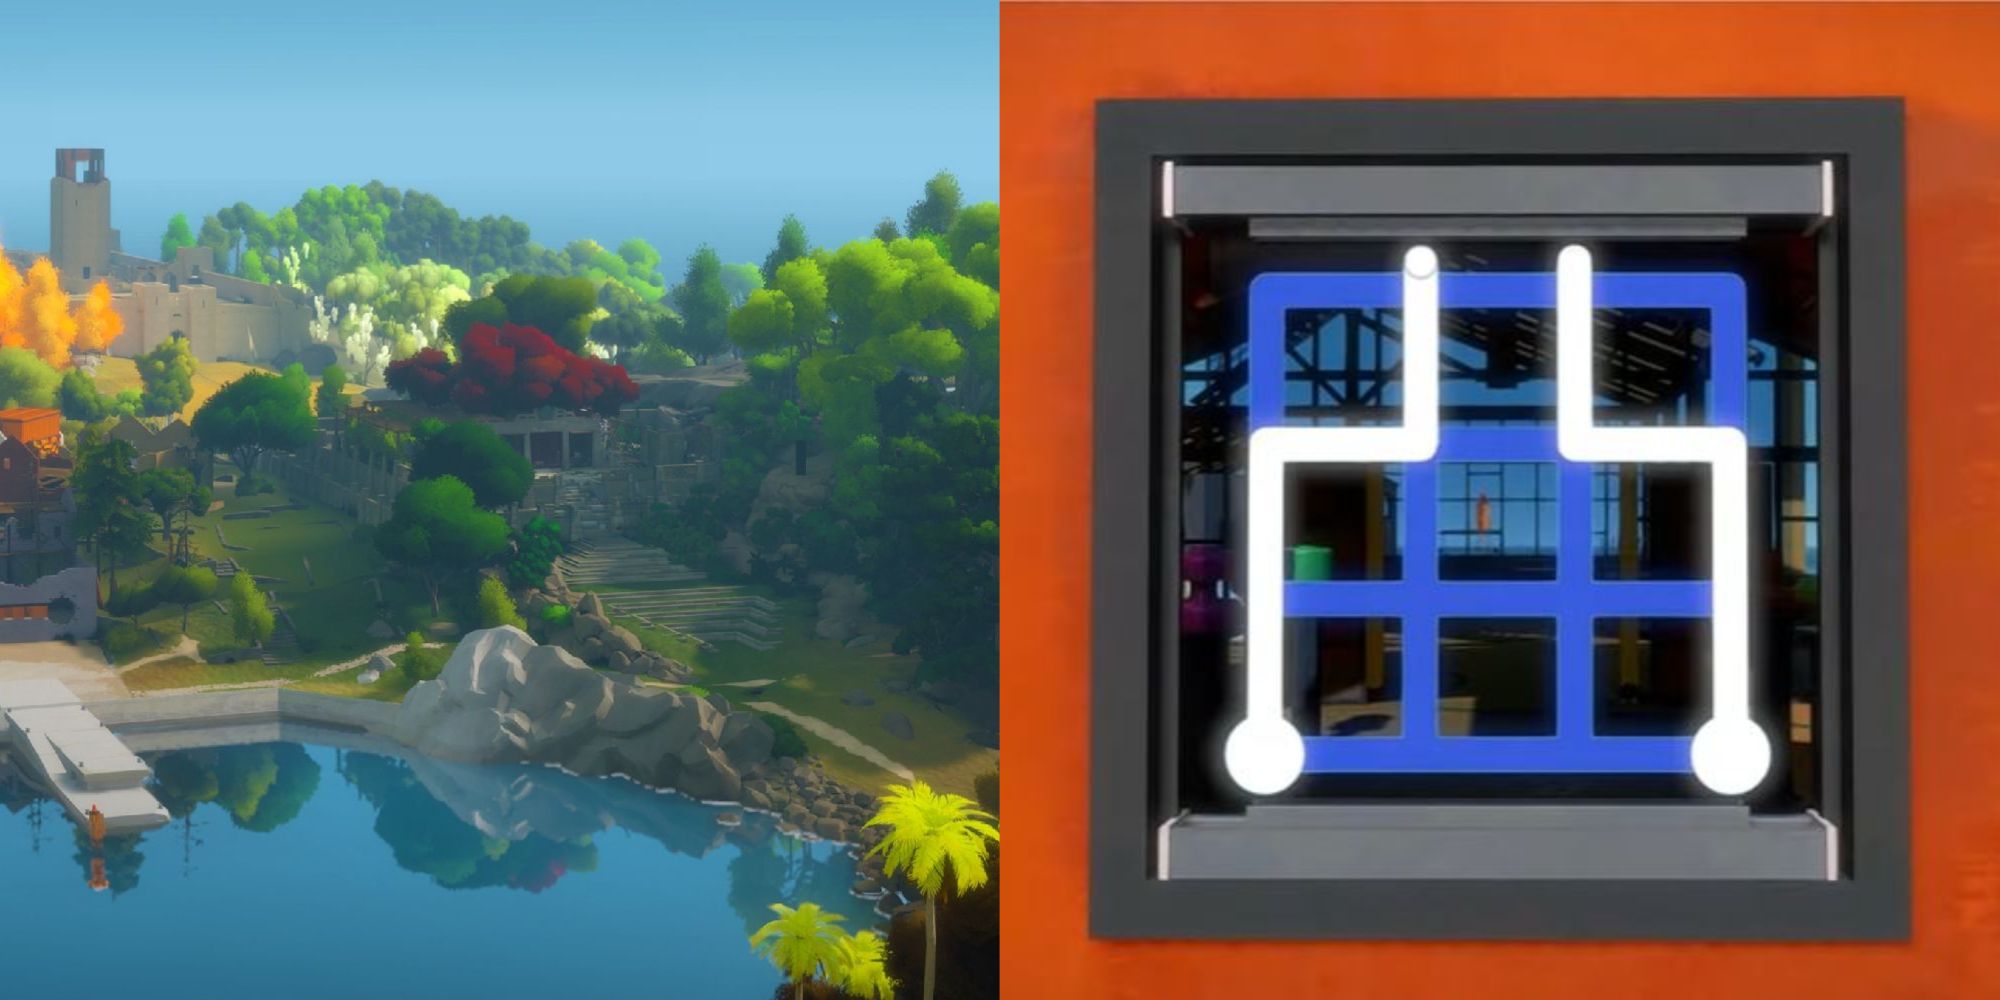 Split image of the island's exterior view and a symmetry puzzle from The Witness.